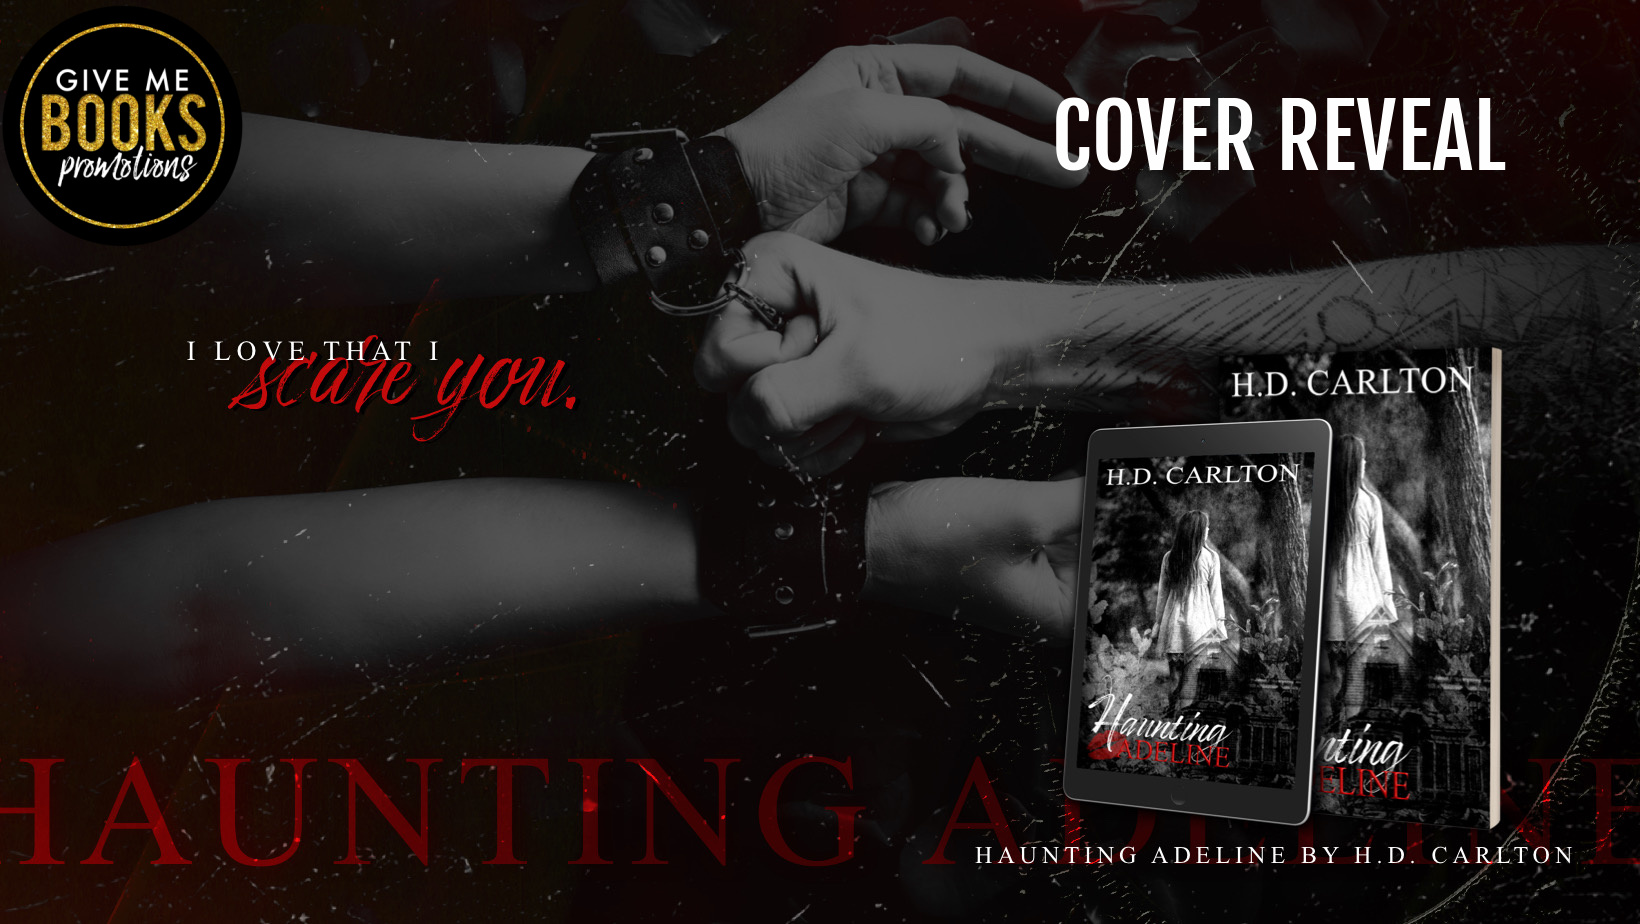 COVER REVEAL - Haunting Adeline by H.D. Carlton